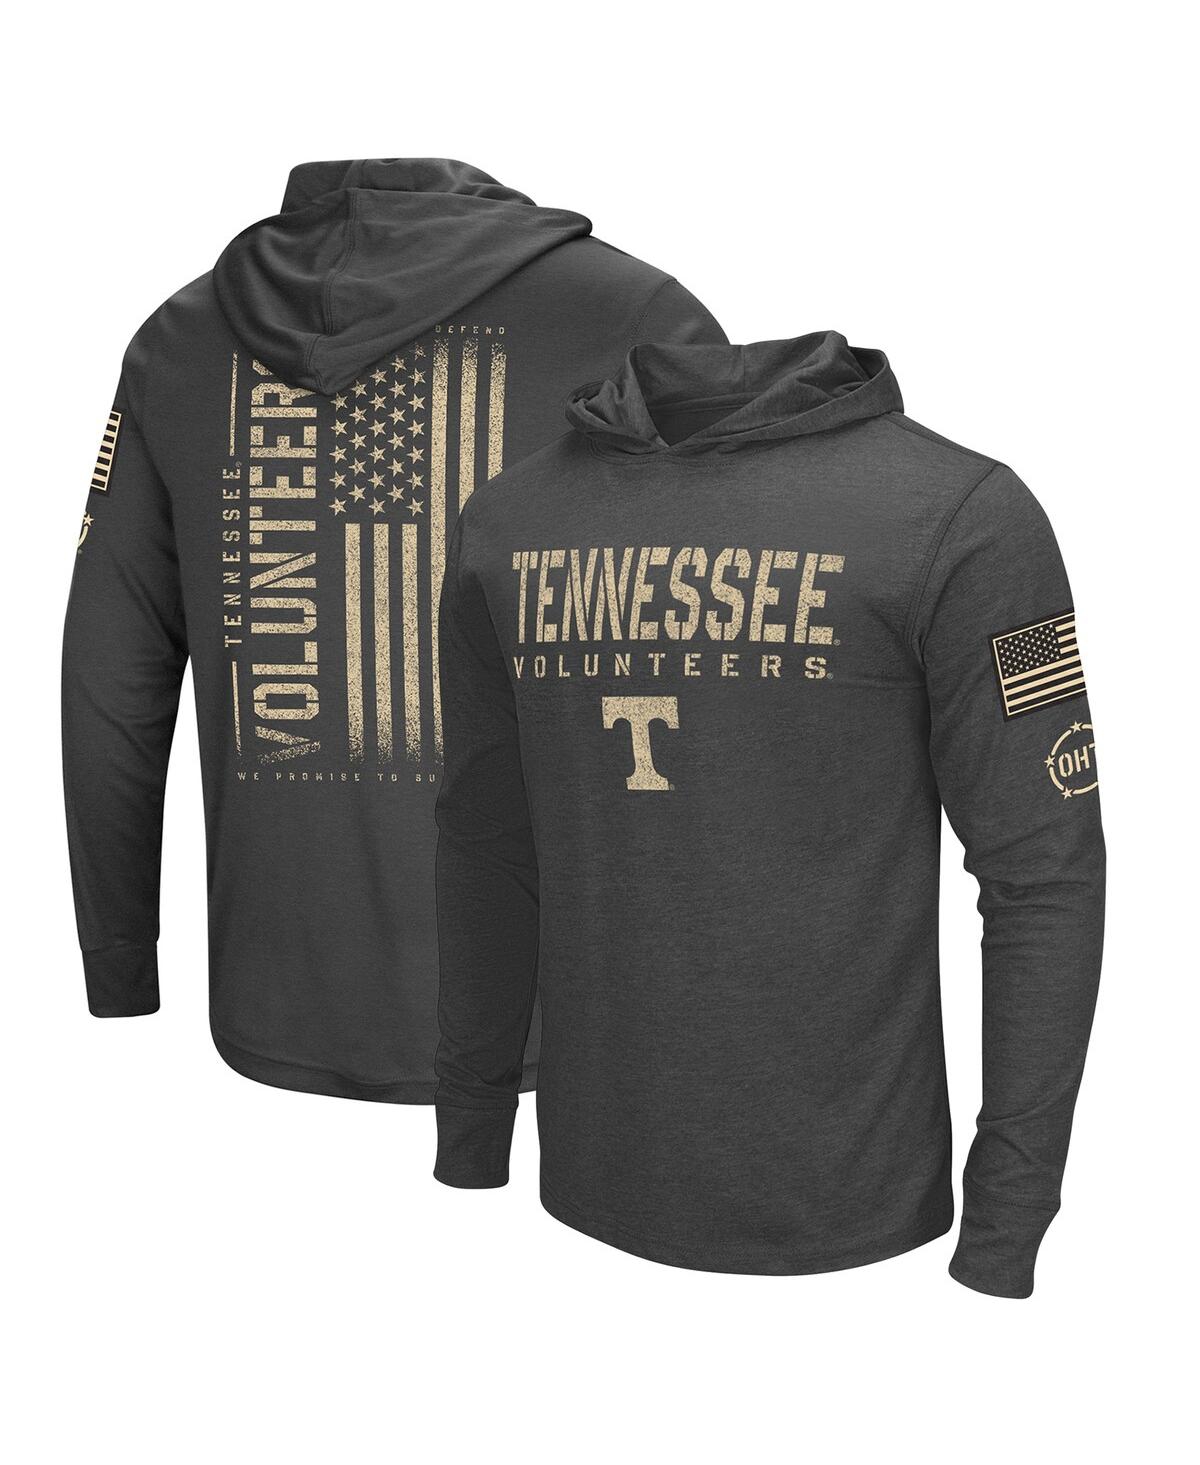 Men's Colosseum Charcoal Distressed Tennessee Volunteers Team Oht Military-Inspired Appreciation Hoodie Long Sleeve T-shirt - Charcoal